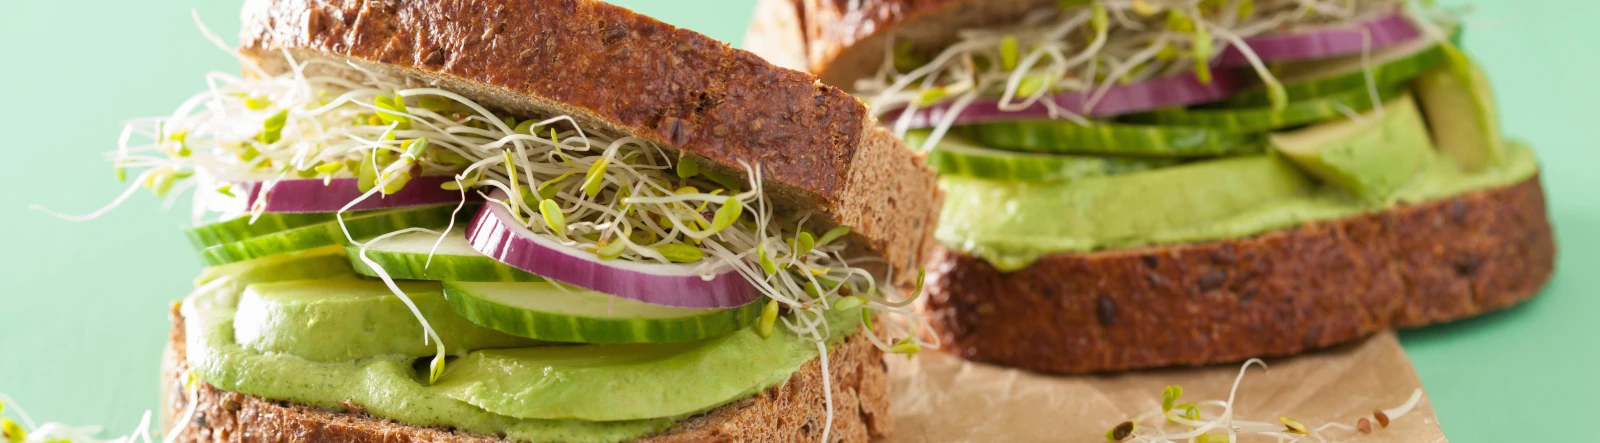 Two sandwiches filled with avocado, cucumber, red onion, and cress